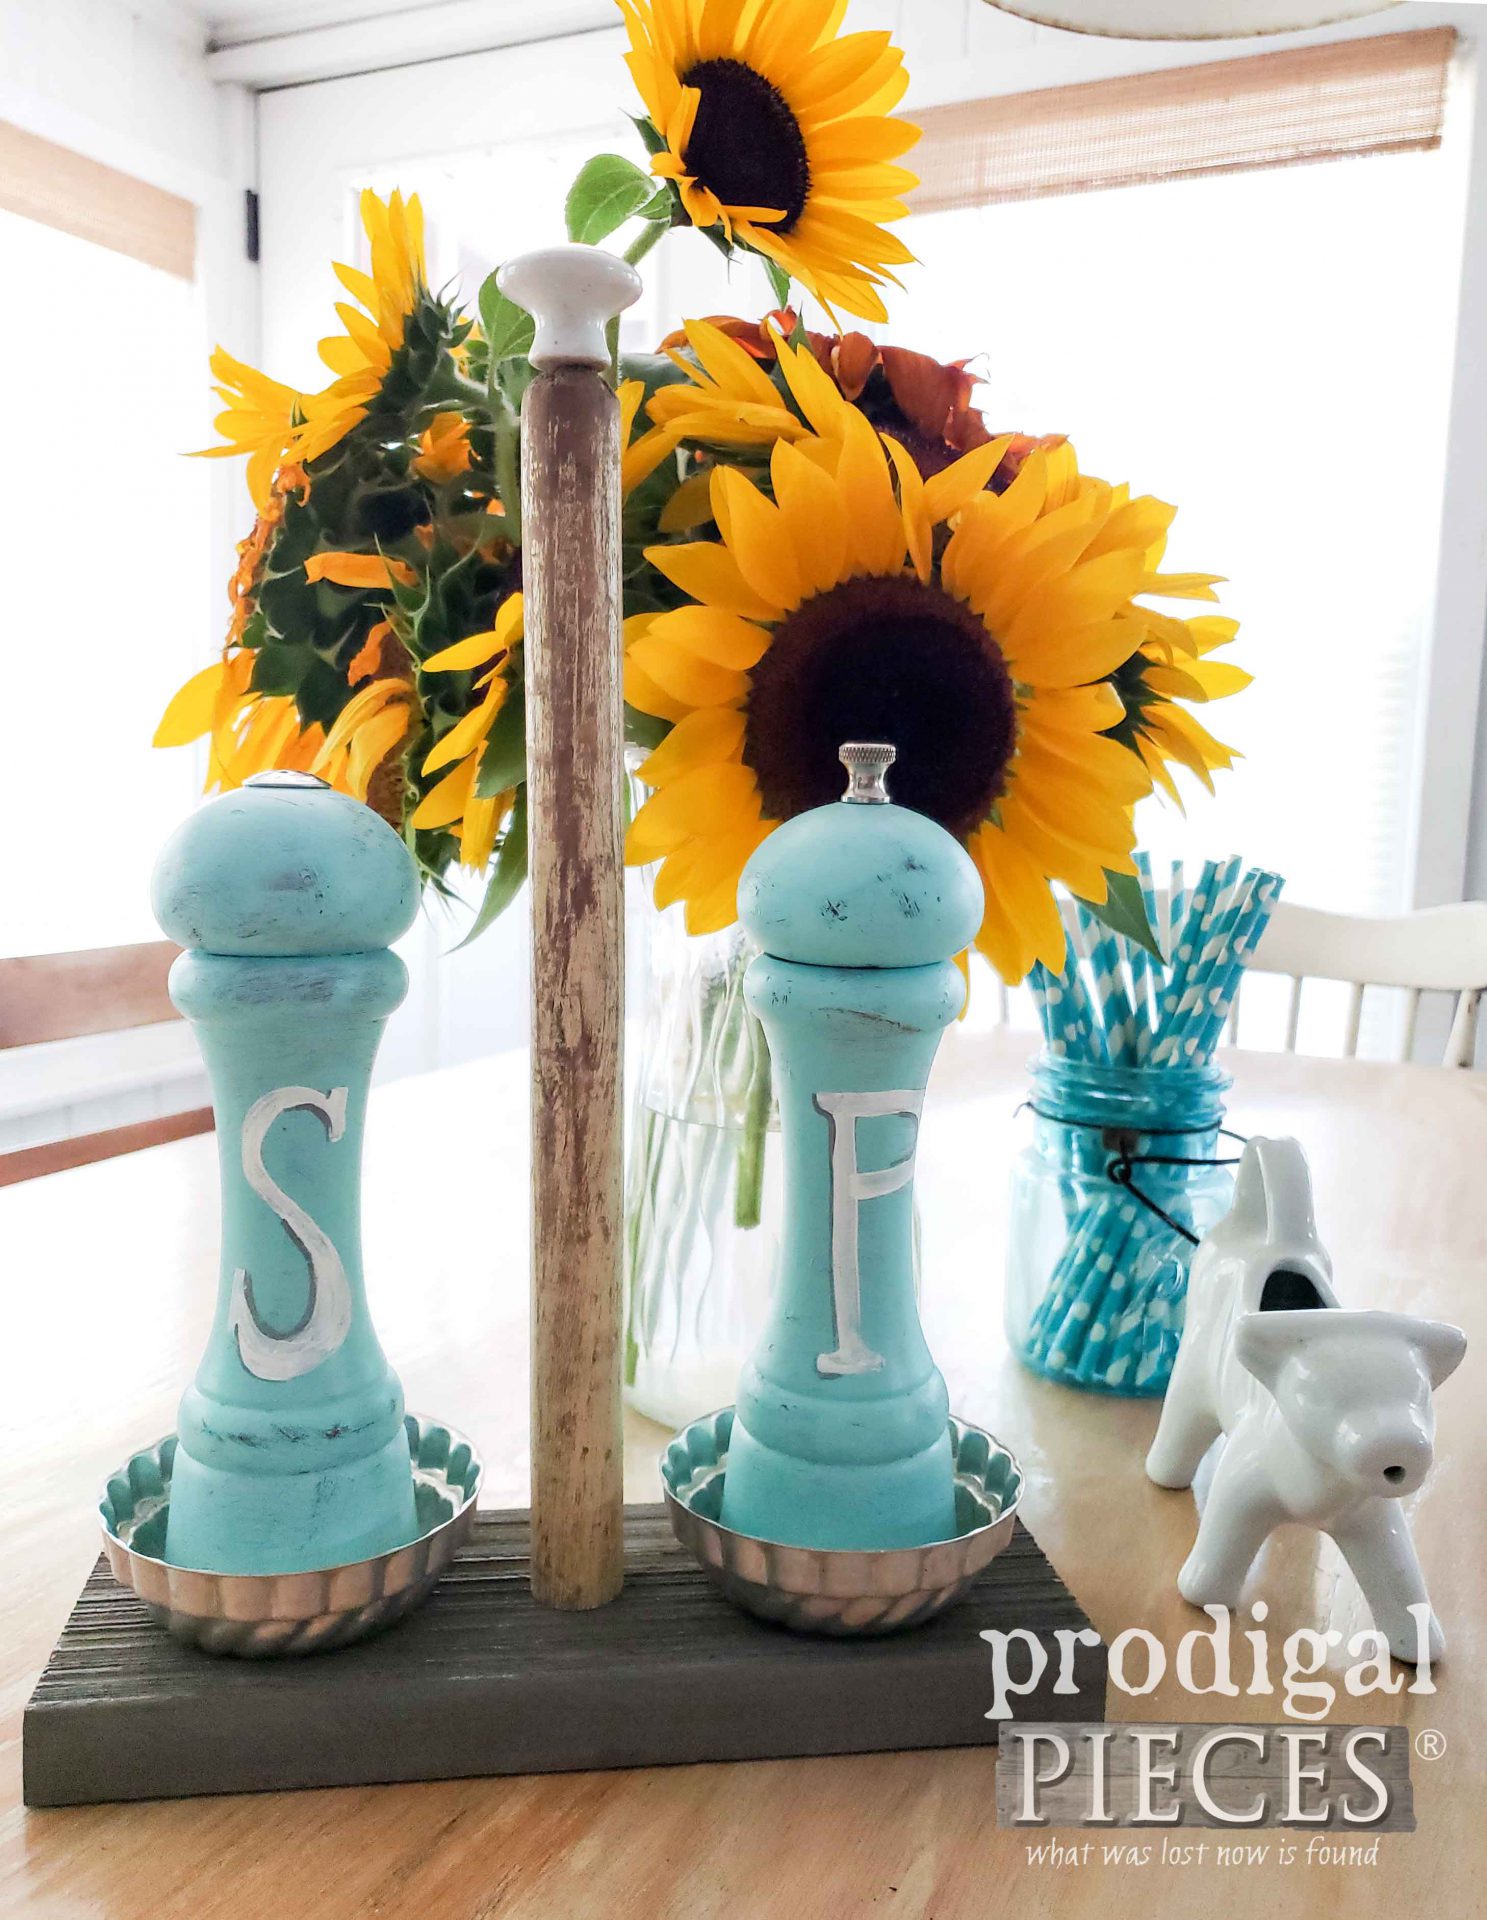 Handmade Cottage Style Salt & Pepper Set with Stand by Larissa of Prodigal Pieces | prodigalpieces.com #prodigalpieces #diy #home #homedecor #cottage #kitchen